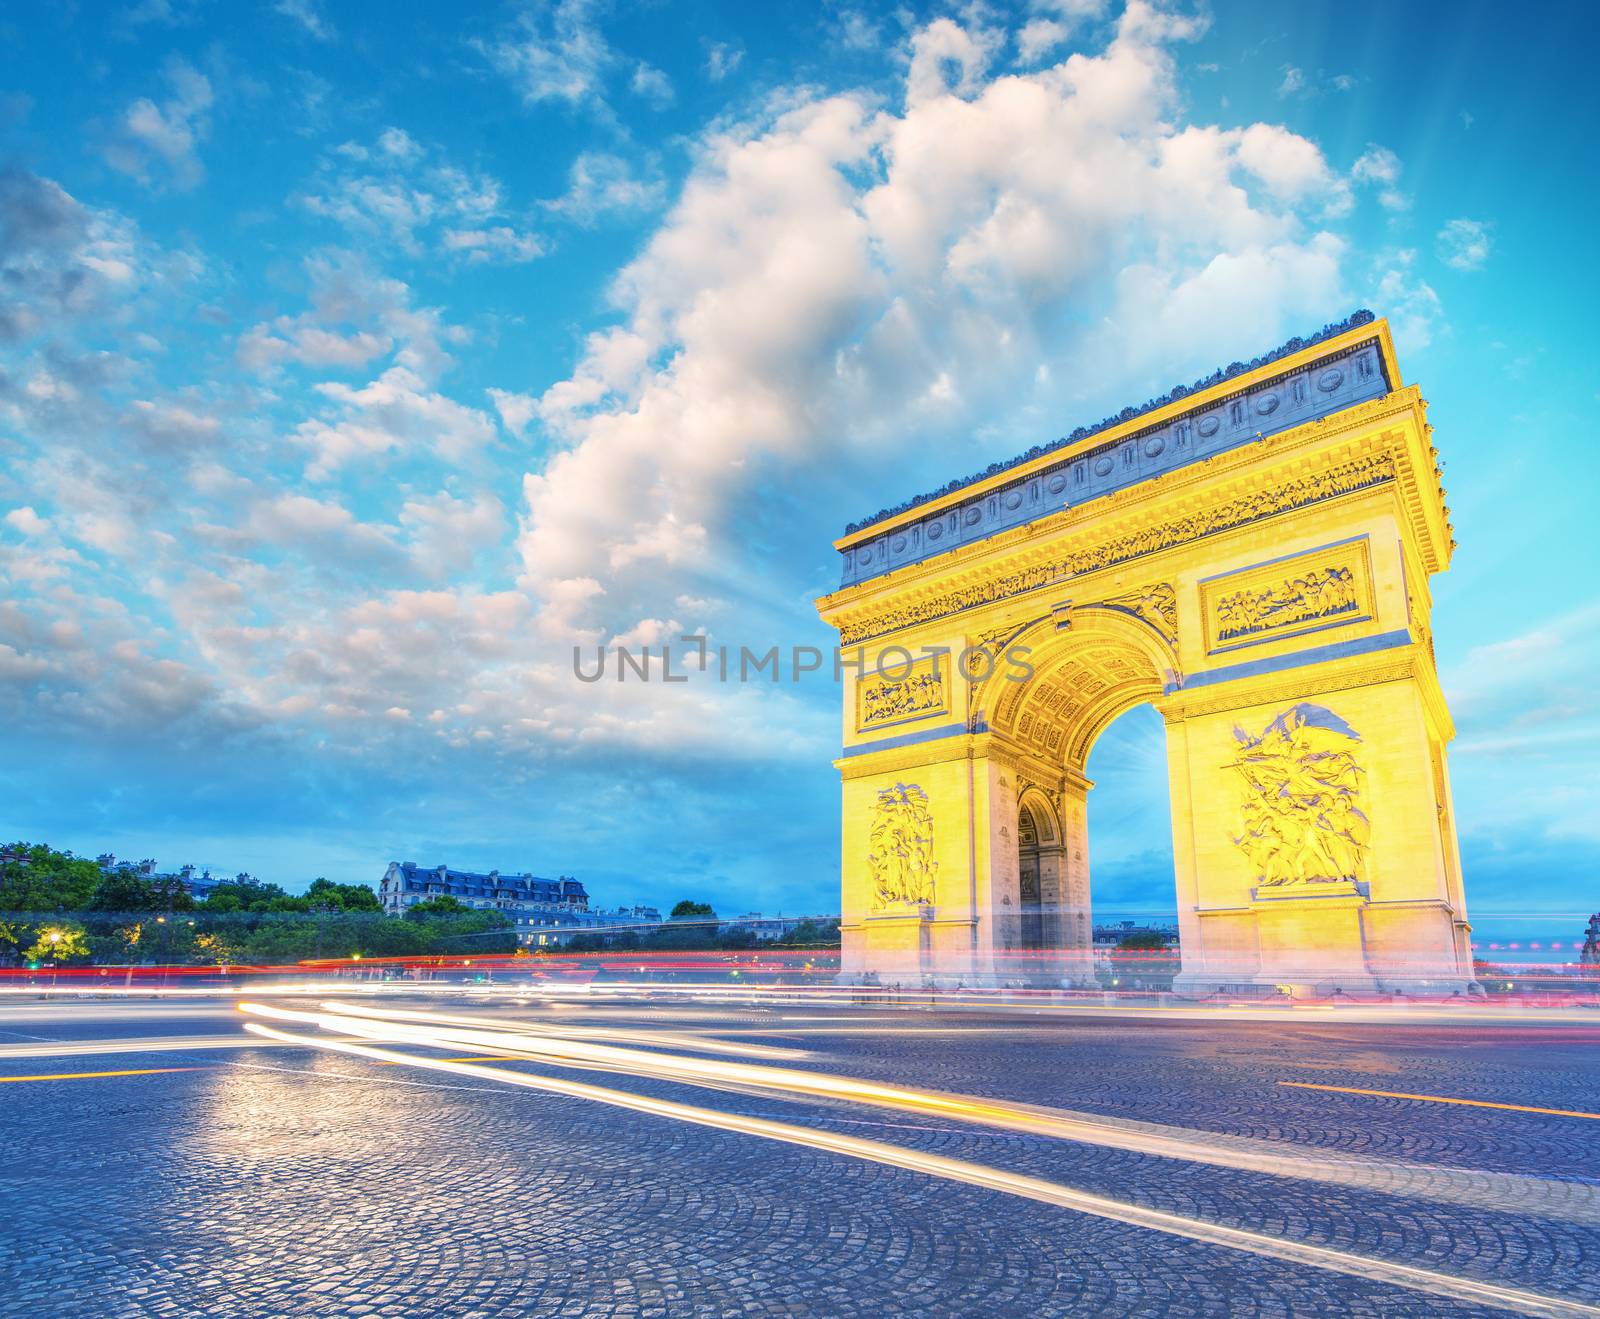 Amazing sunset view of Triumph Arc in Paris with Etoile Roundabout traffic light trails.